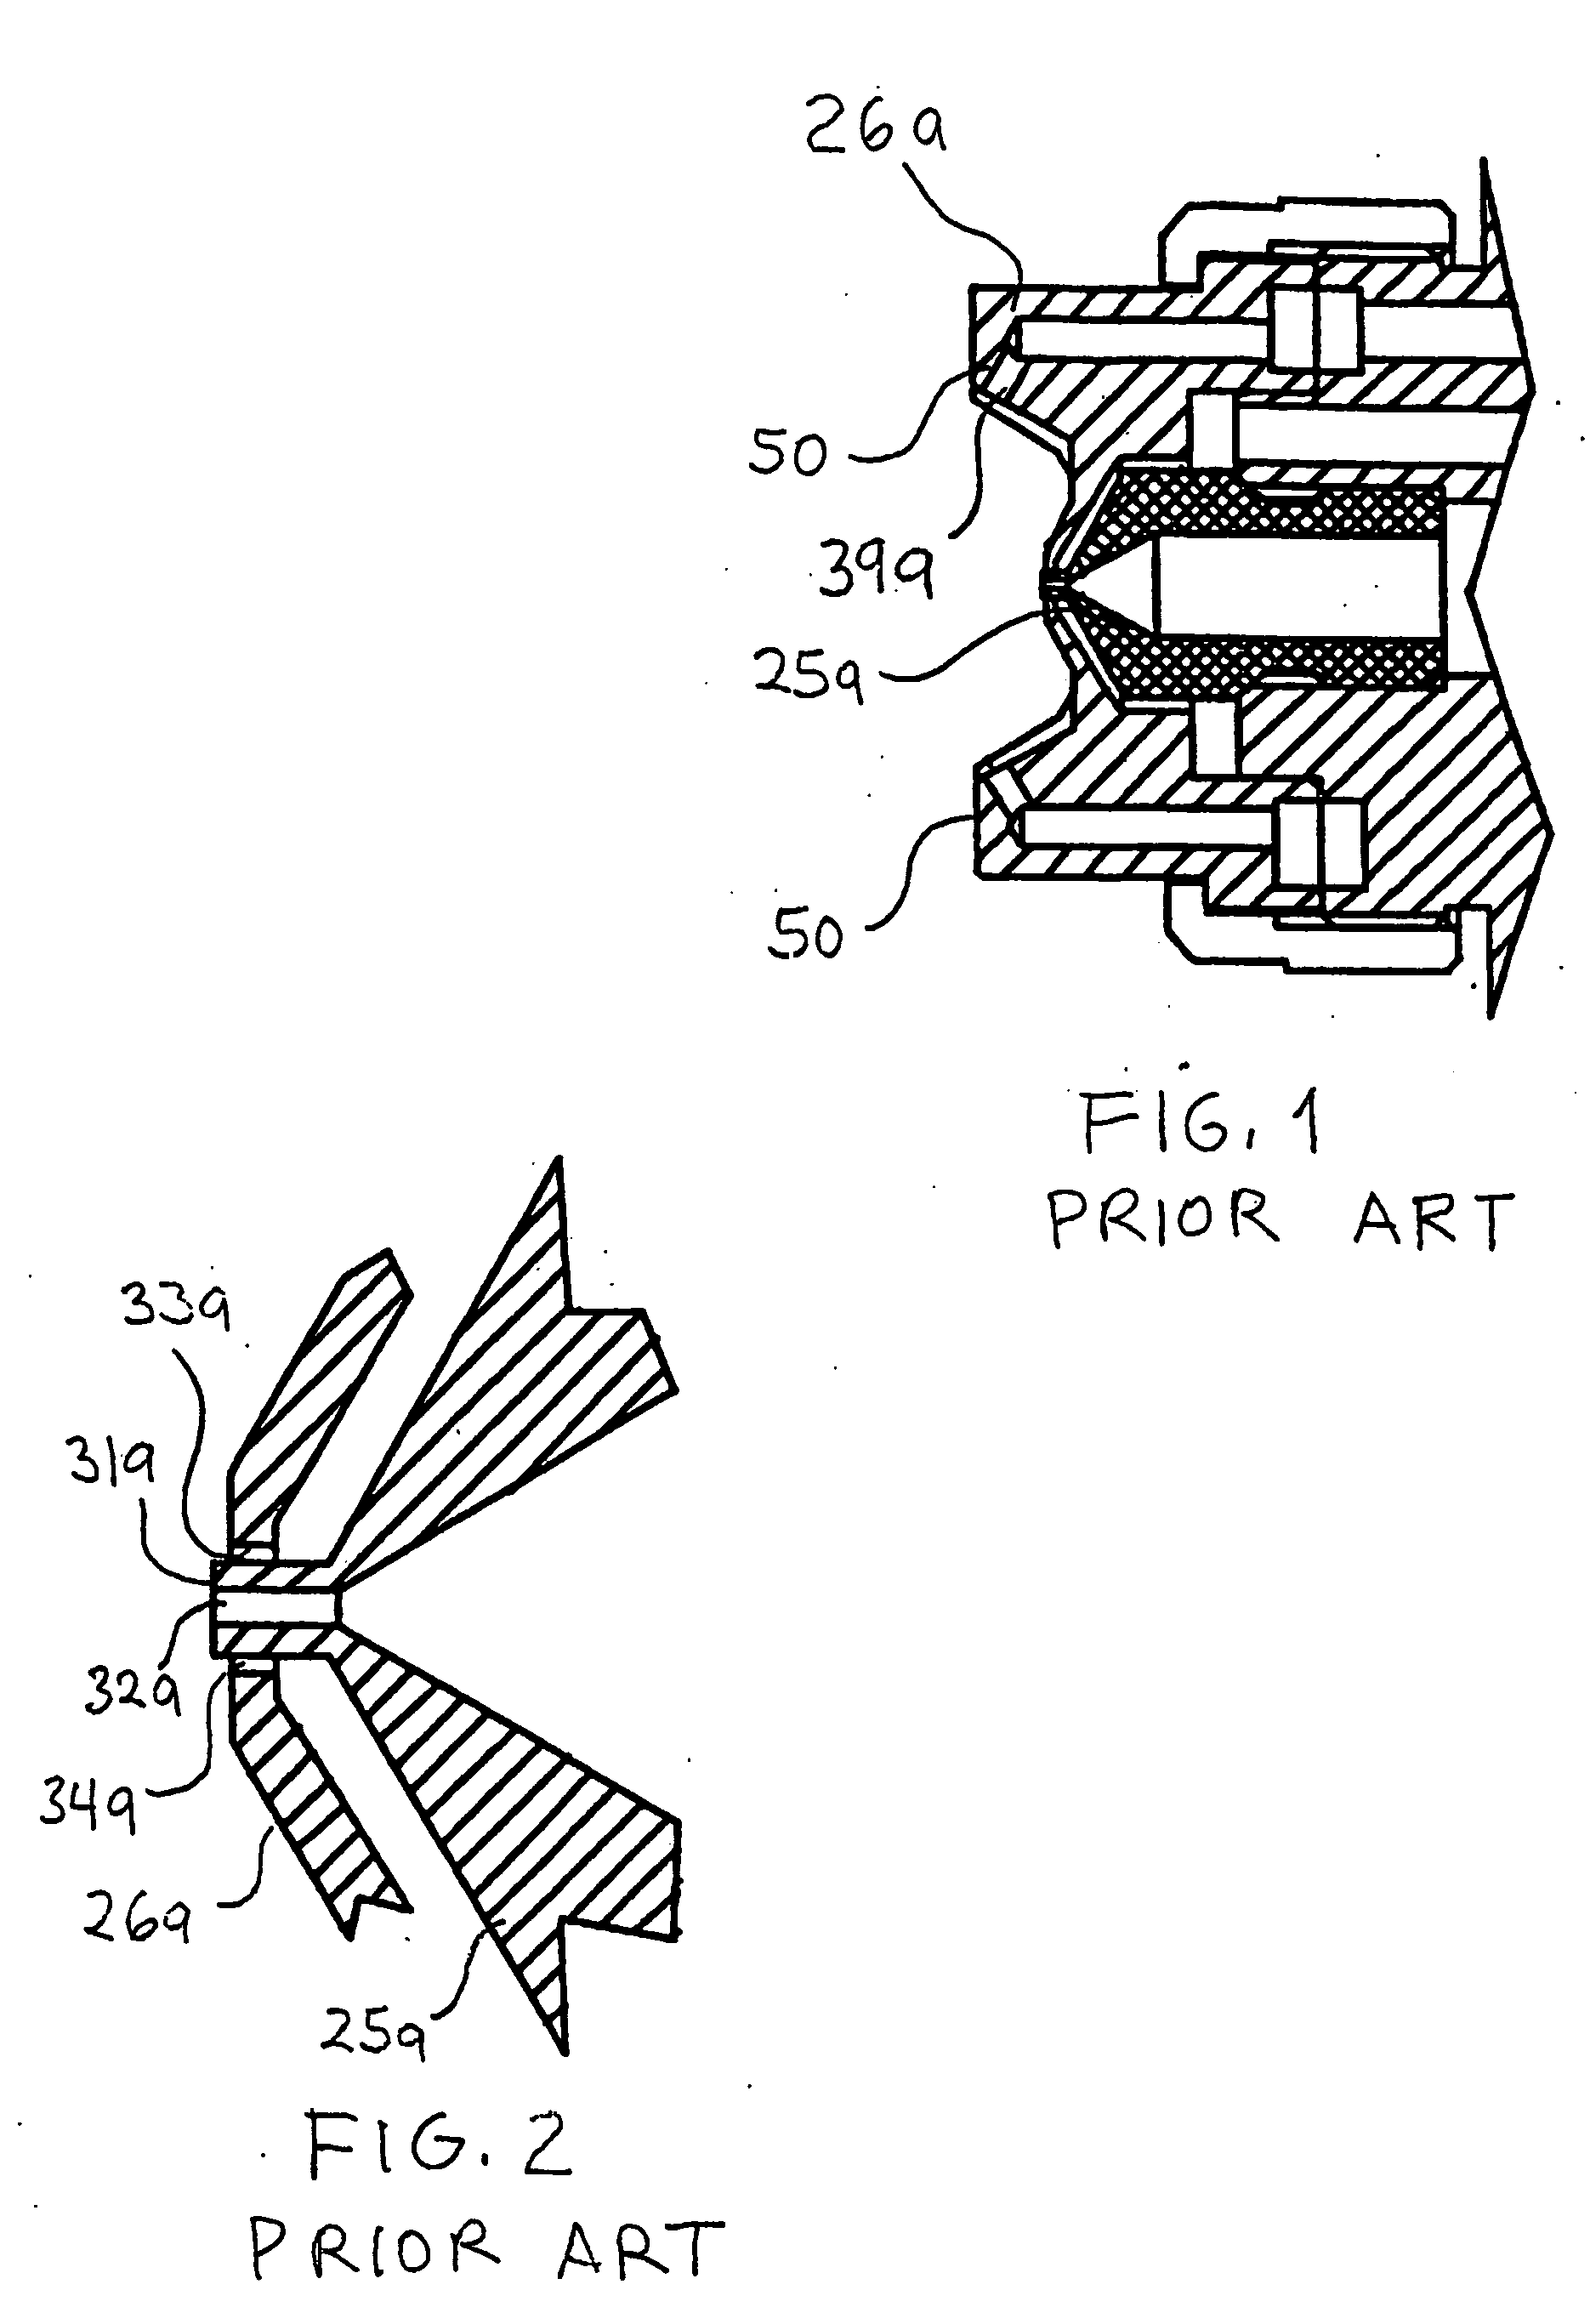 External mix air assisted spray nozzle assembly